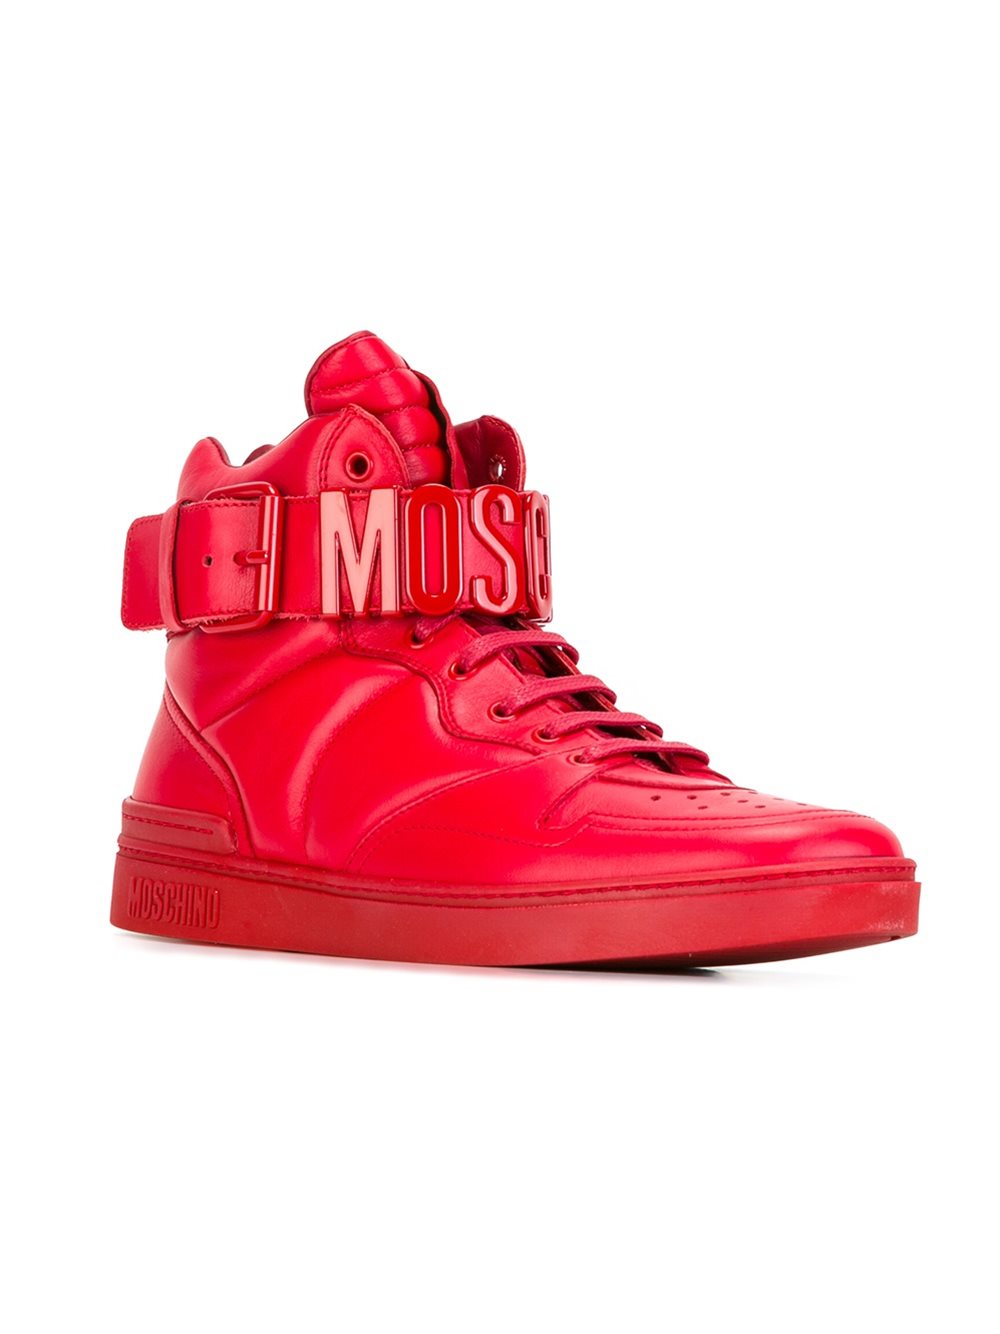 Lyst - Moschino Logo Plaque Hi-top Sneakers in Red for Men